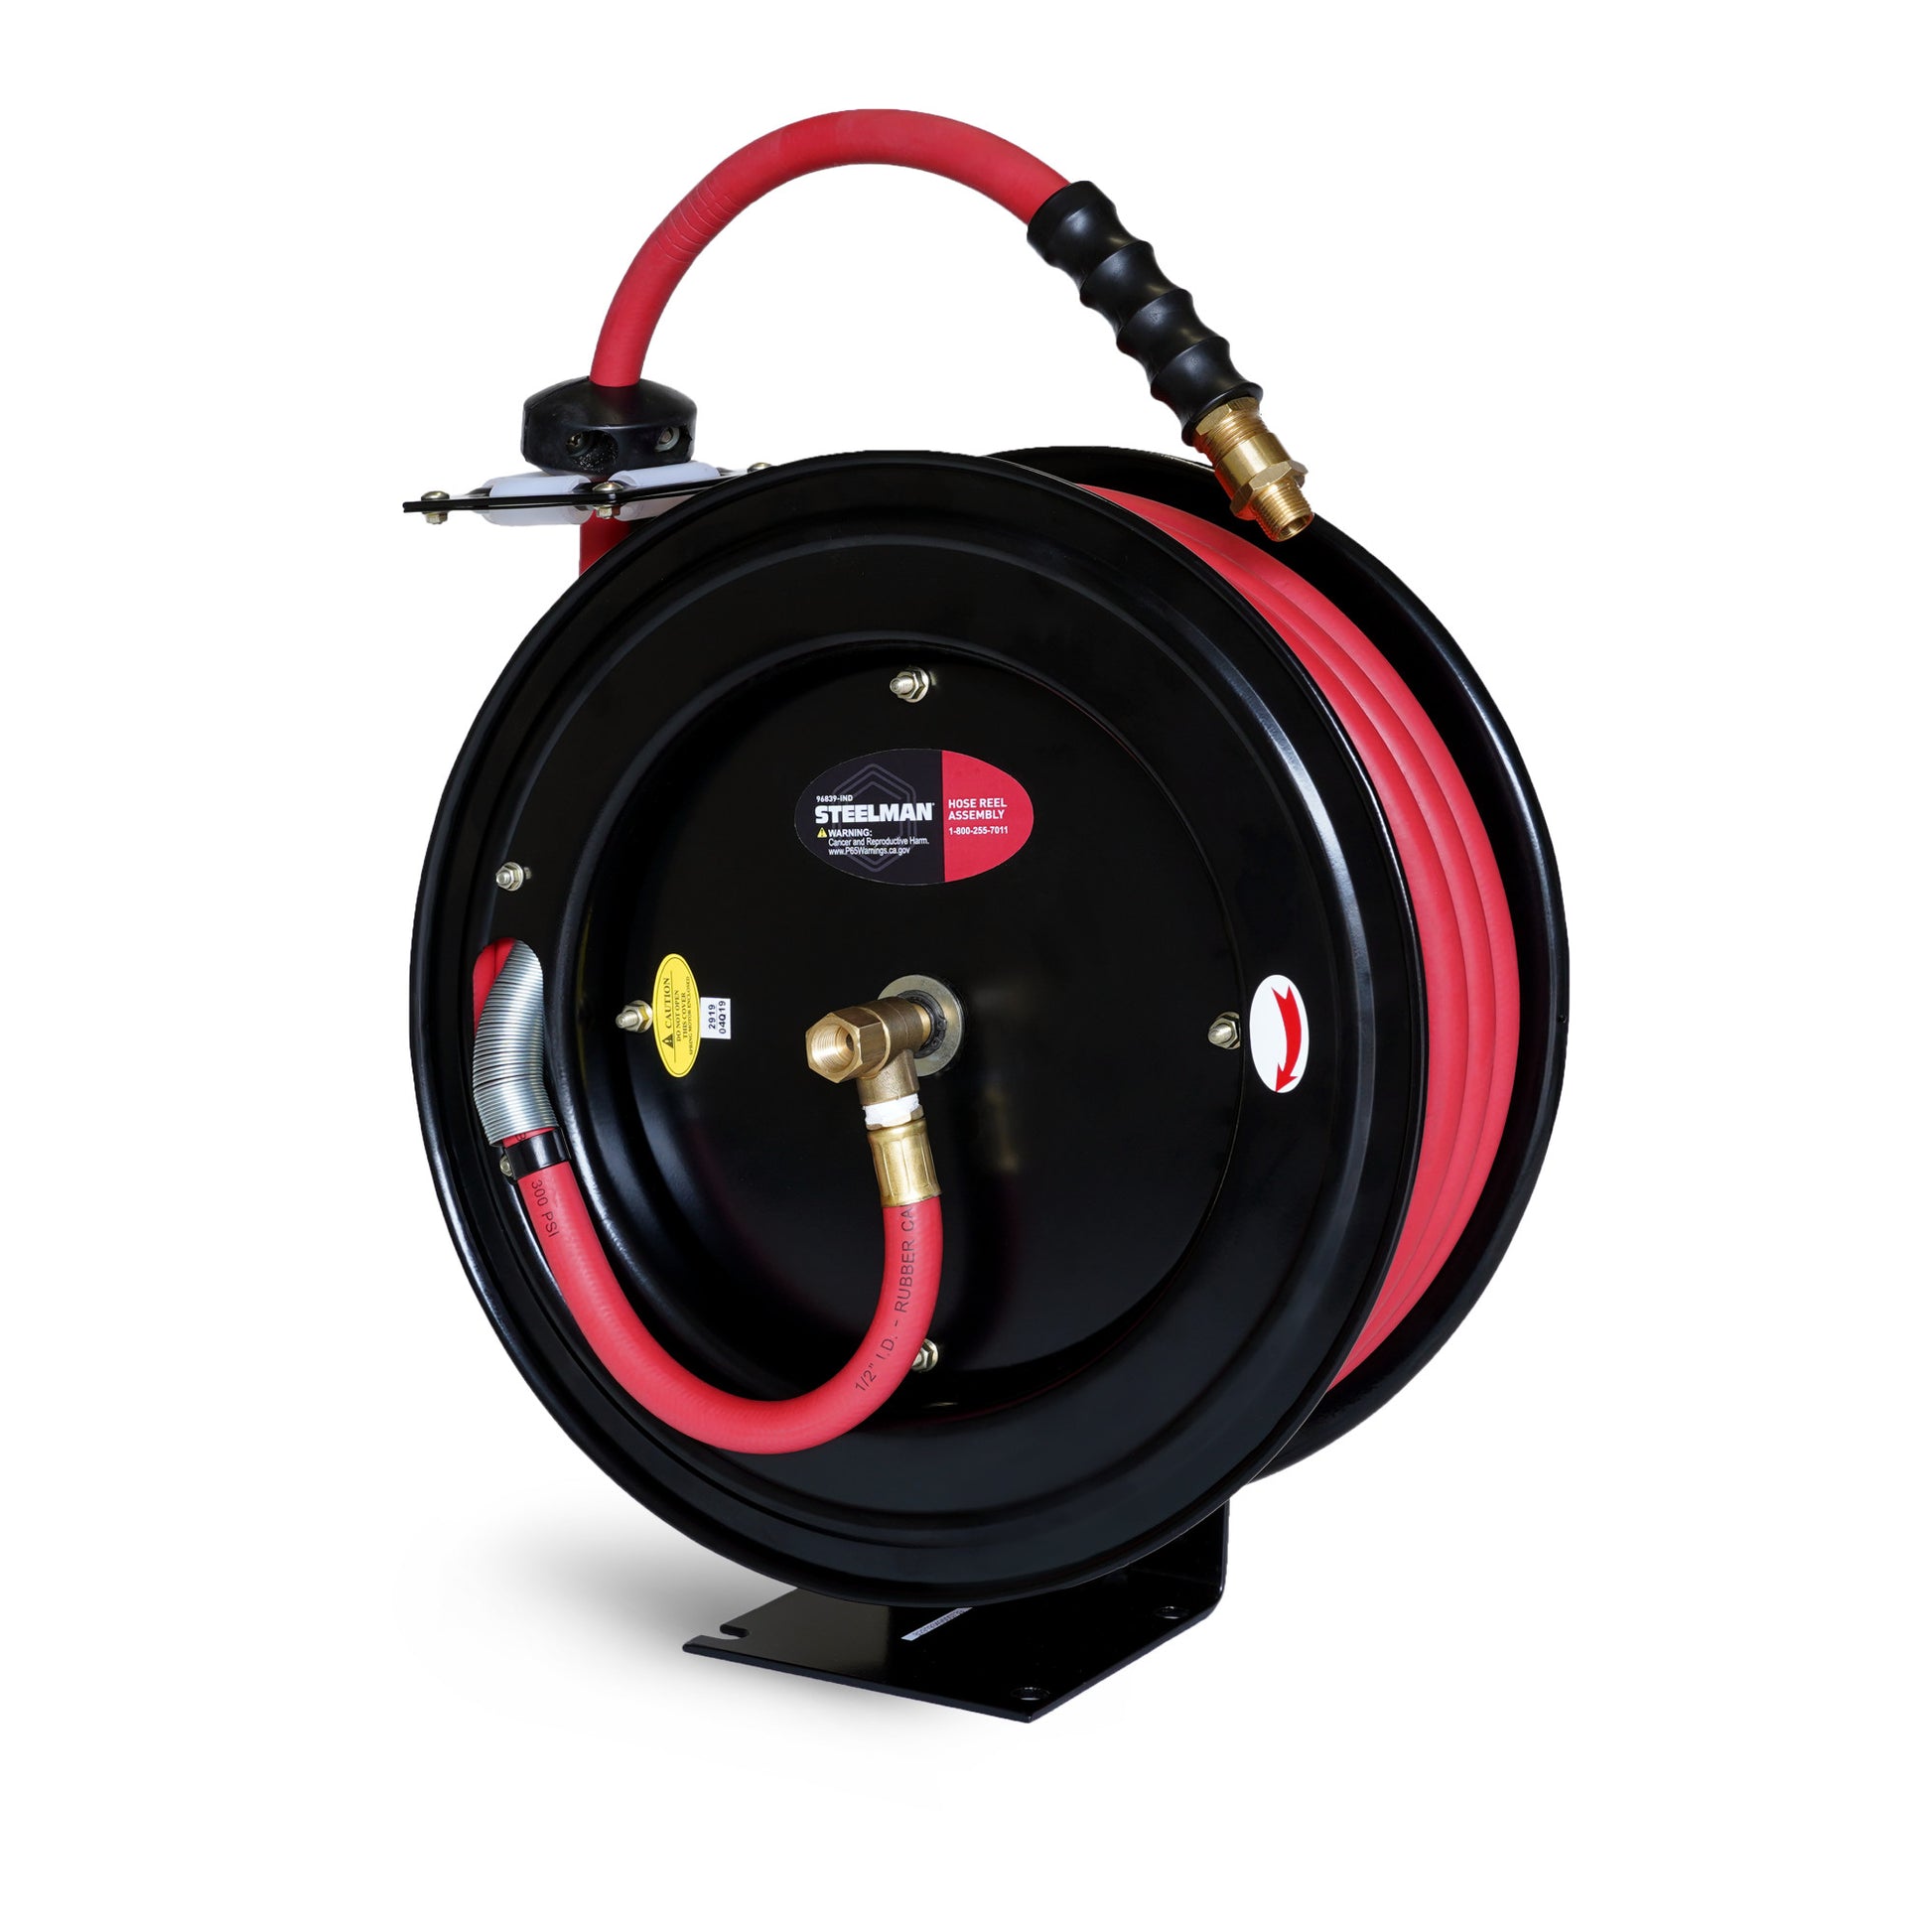 Steelman 96839-IND Enclosed Spring Pneumatic Hose Reel with 50-Foot 1/2-Inch ID Hose